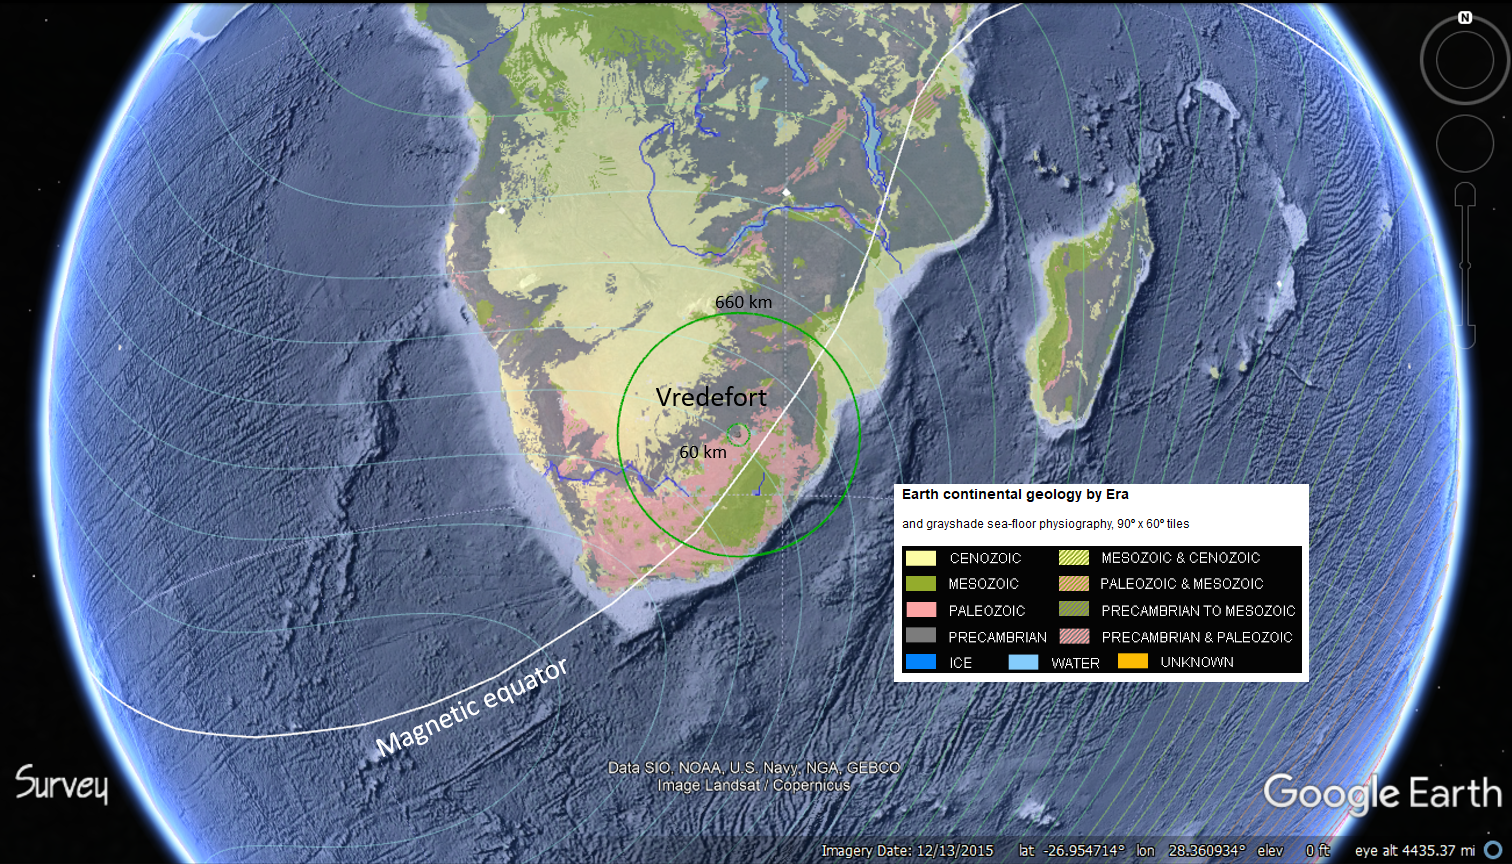 Vredefort astrobleme and the Earth's magentic equator